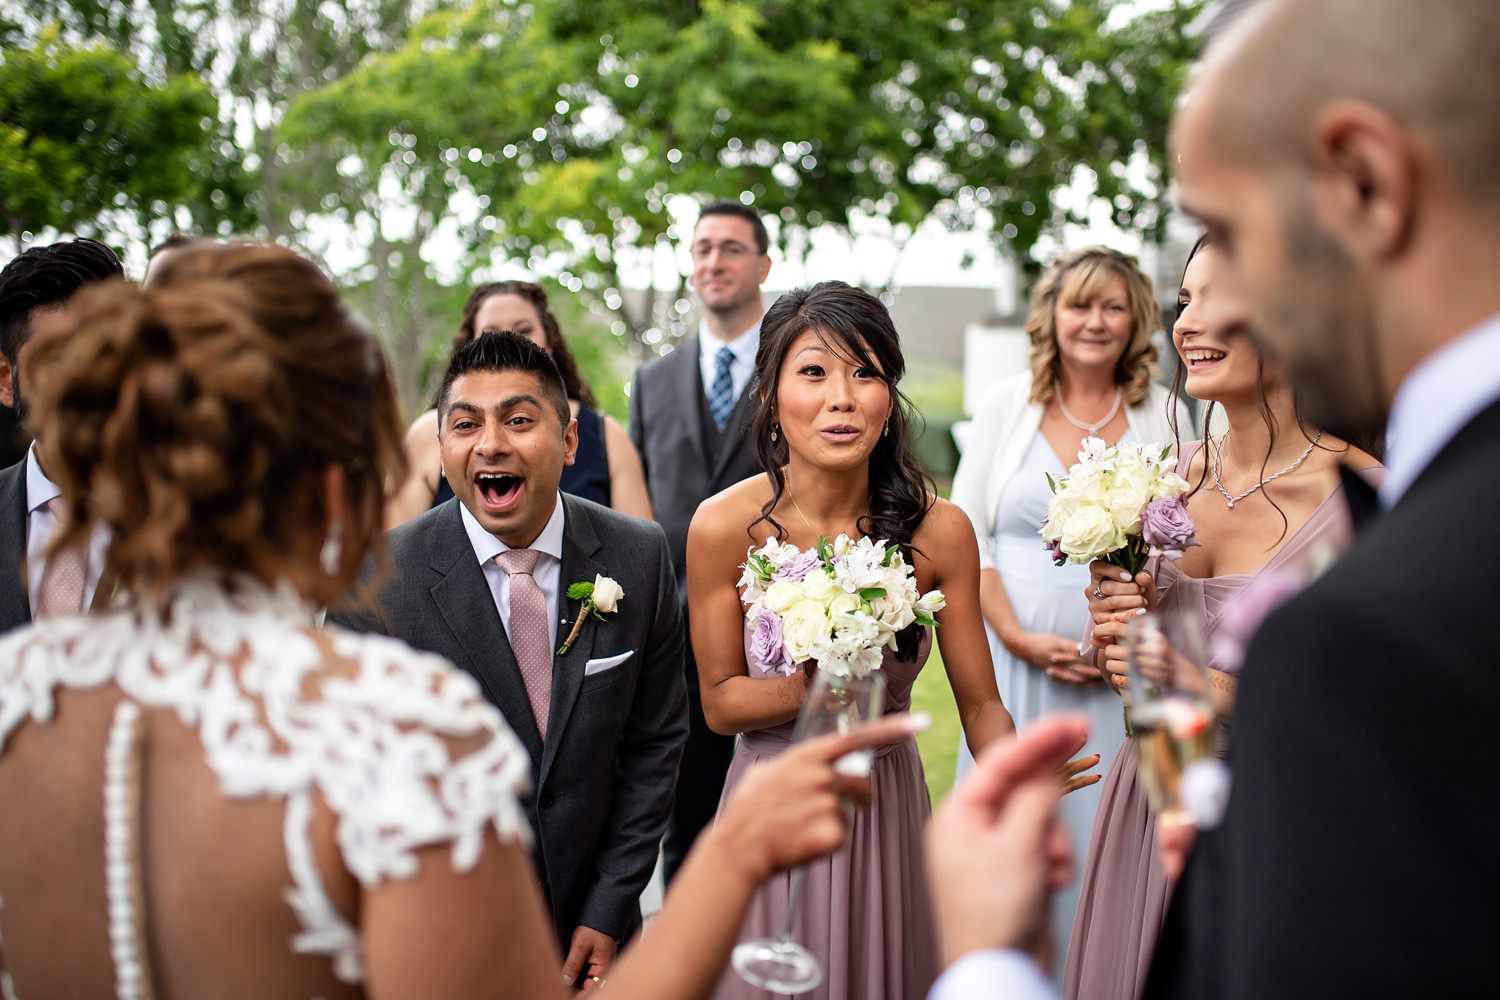 Reaction of the guests after the groom had performed sabered champagne at his wedding in Hermanus